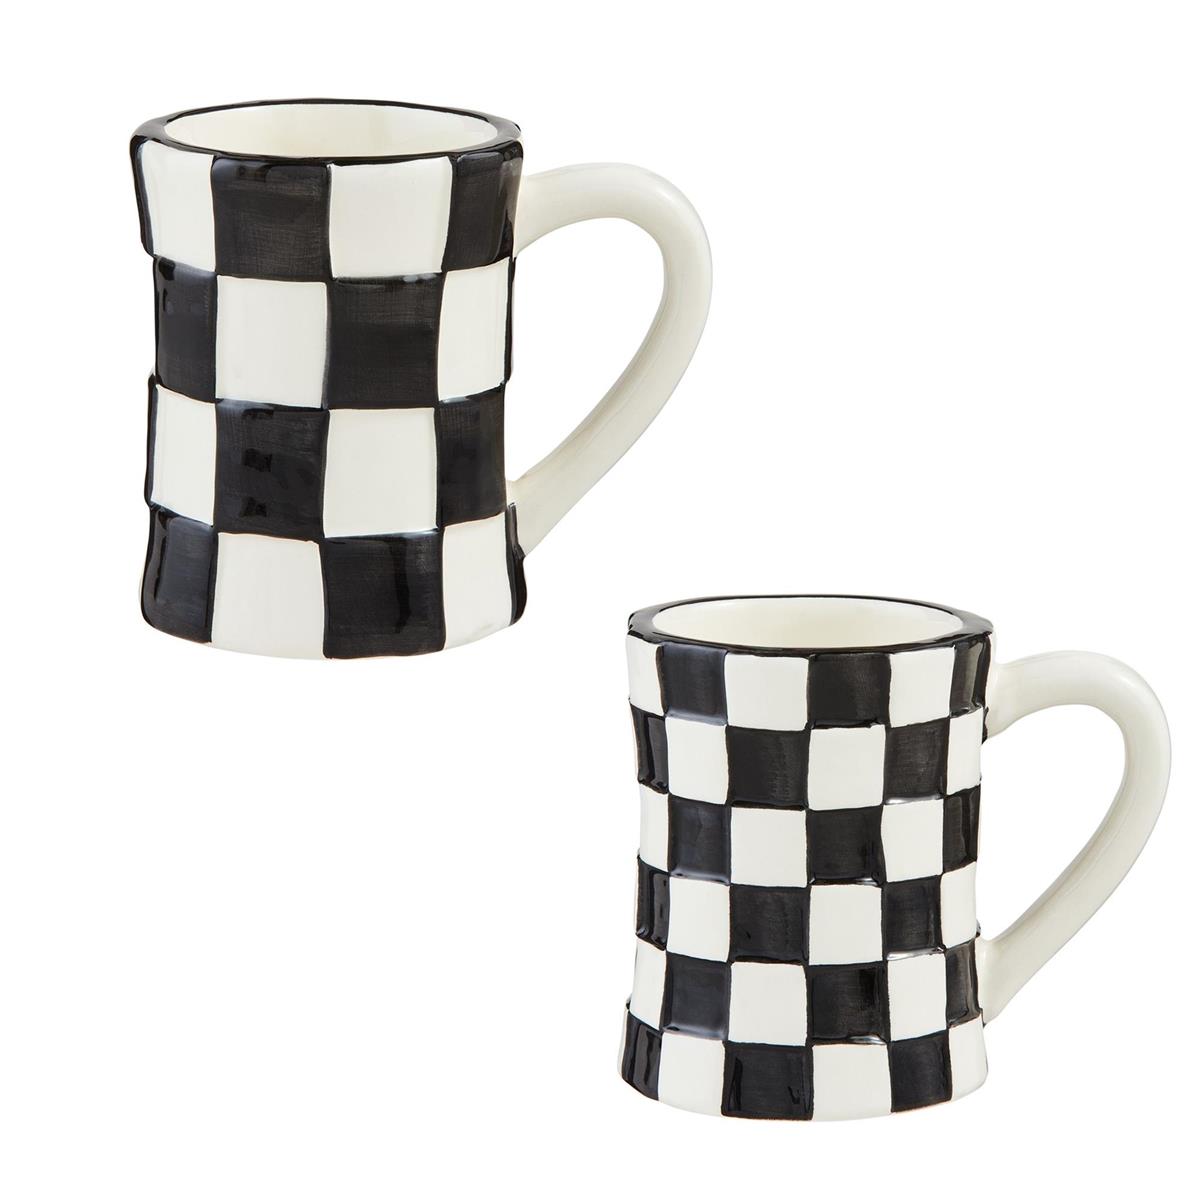 2 black and white checked mugs on a white background.